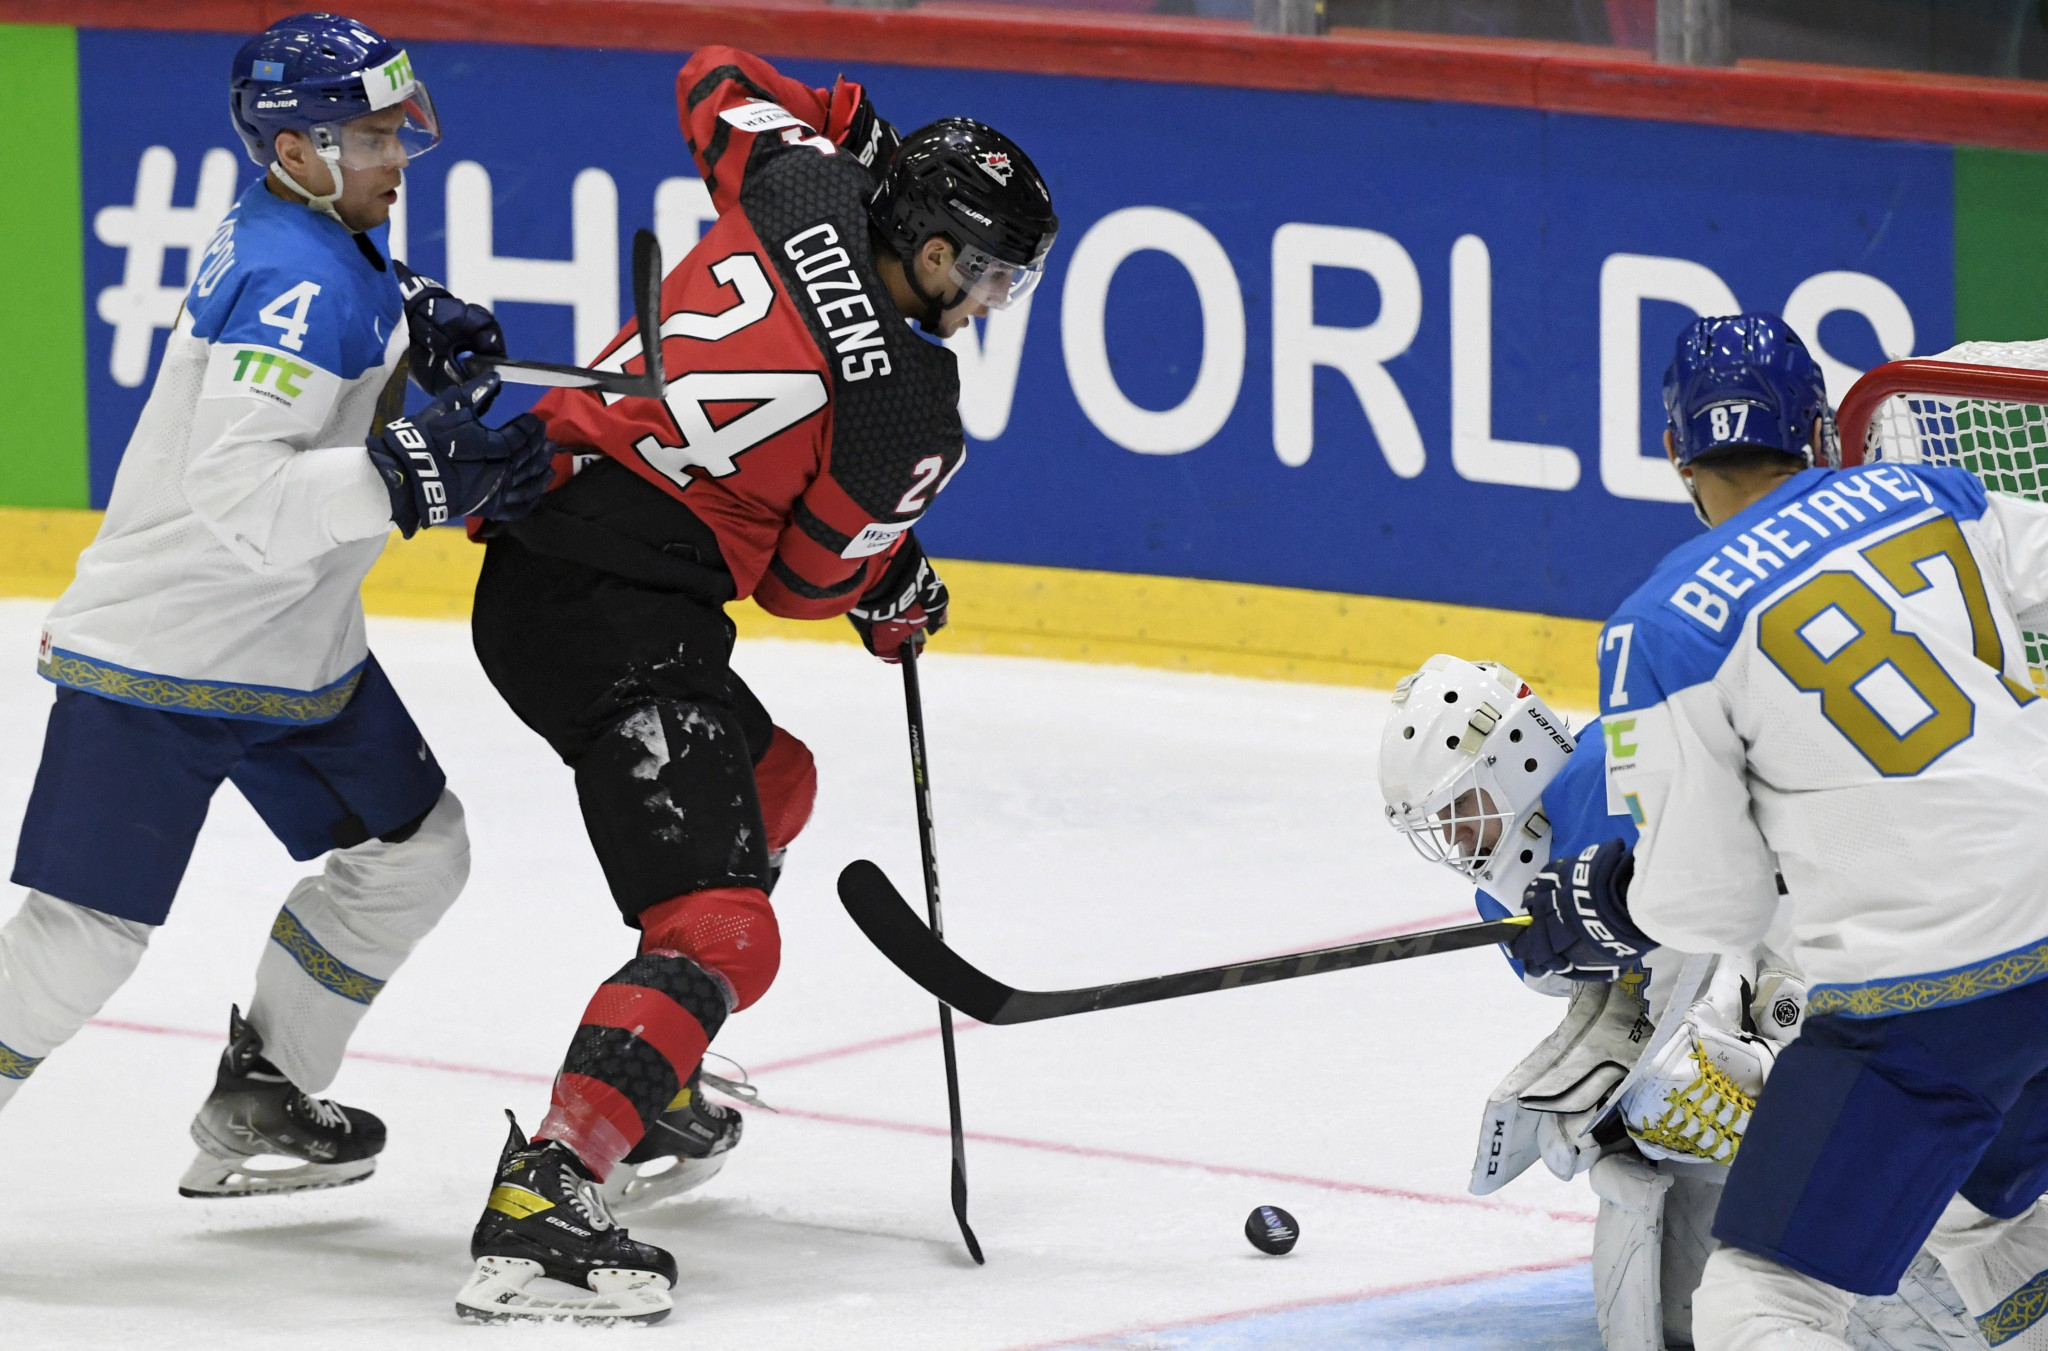 Dylan Cozens netted a hattrick to beat Kazakhstan at the IIHF World Championship ©Getty Images